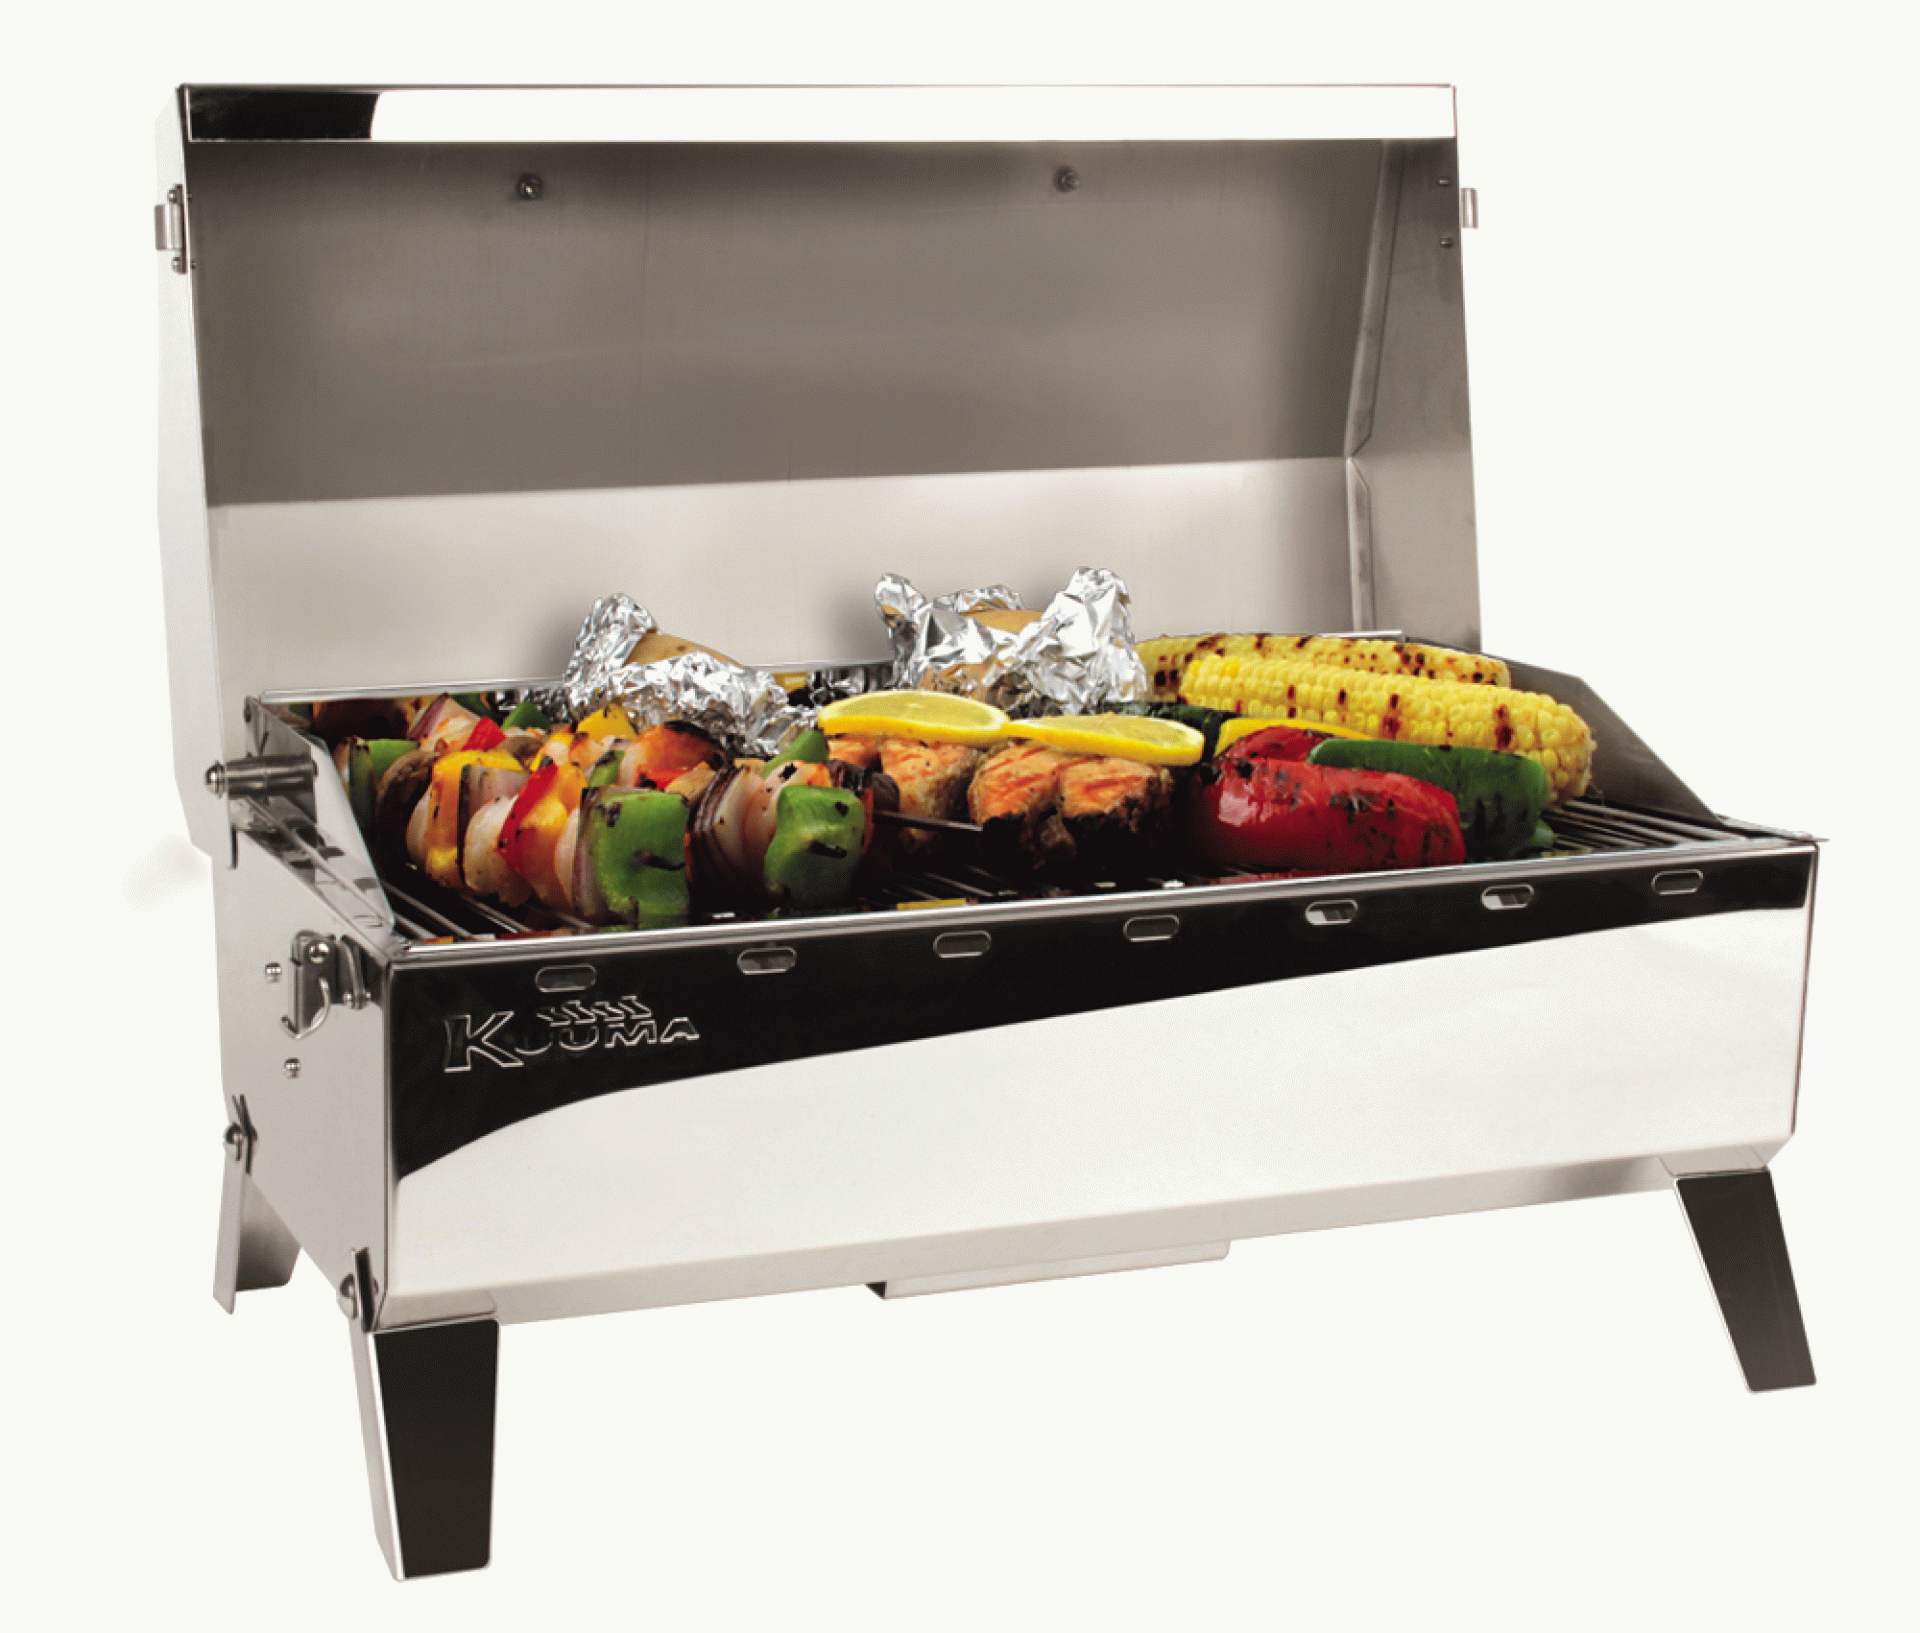 KUUMA PRODUCTS | 58137 | Stow-N-Go 160 Barbecue Grill Propane w/ Regulator and Inboard/Outboard Rail Mount